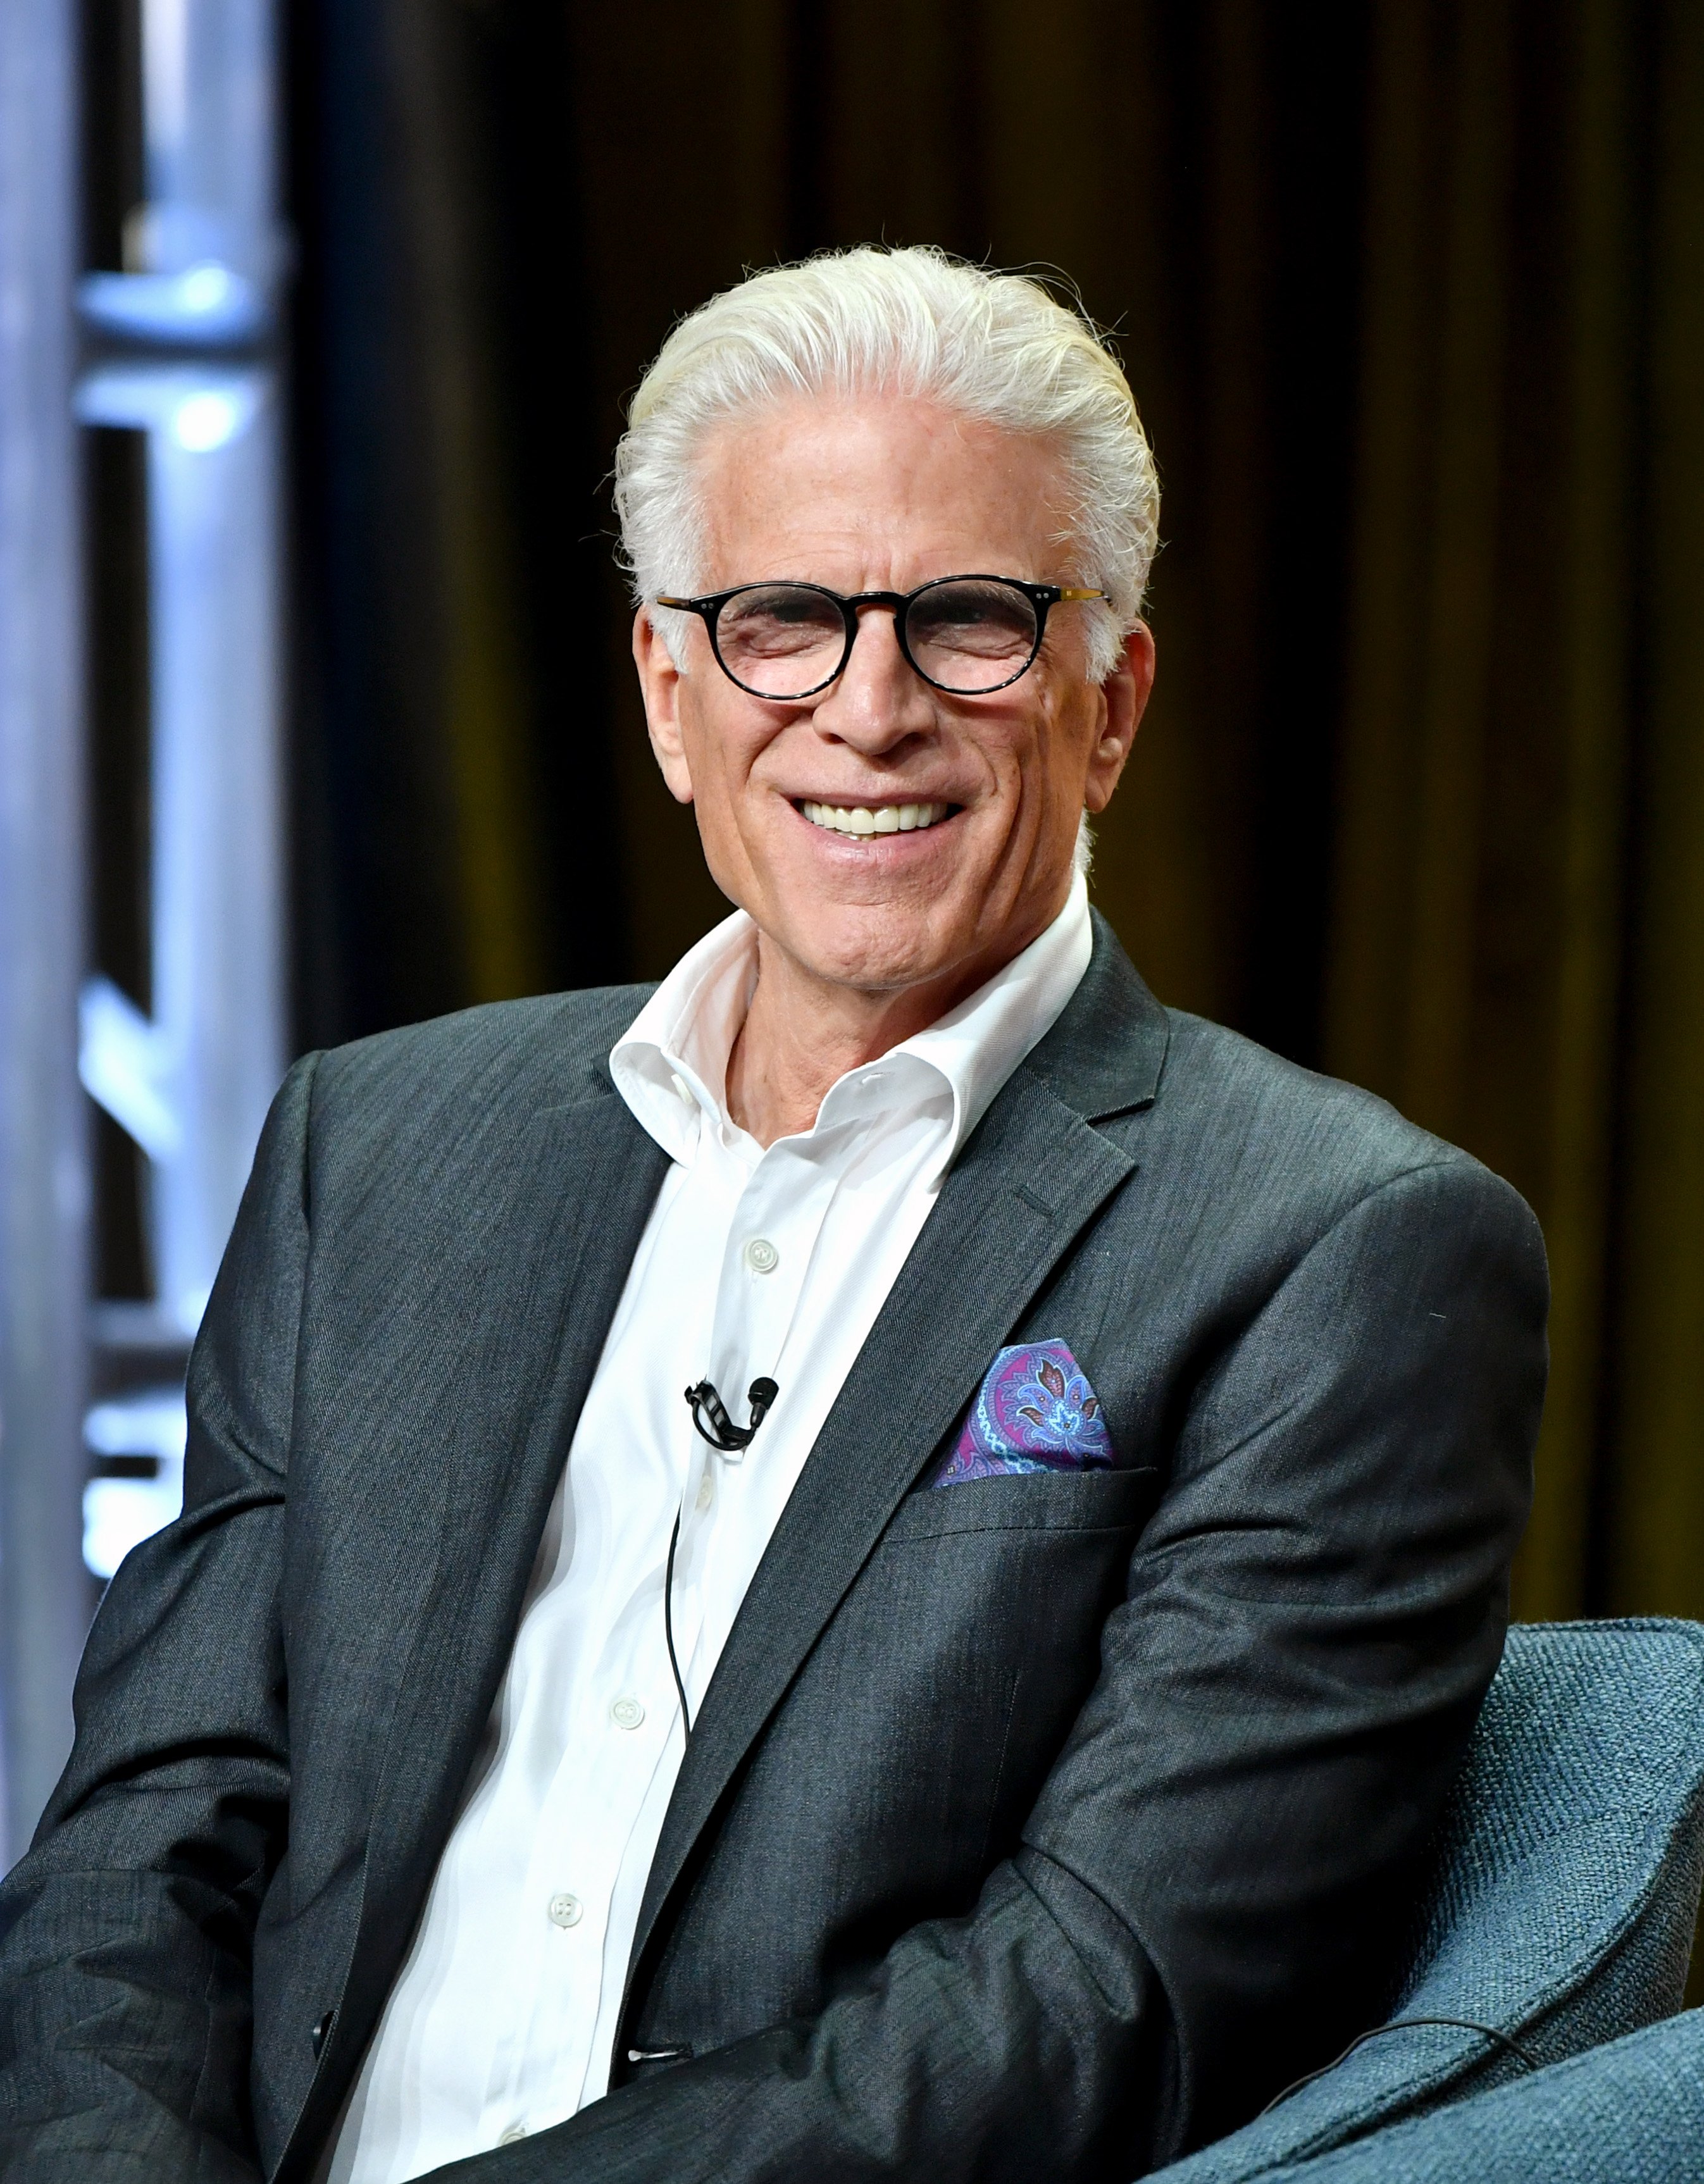 Ted Danson of 'The Good Place' speak during the NBC segment of the 2019 Summer TCA Press Tour at The Beverly Hilton Hotel on August 08, 2019 | Photo: GettyImages